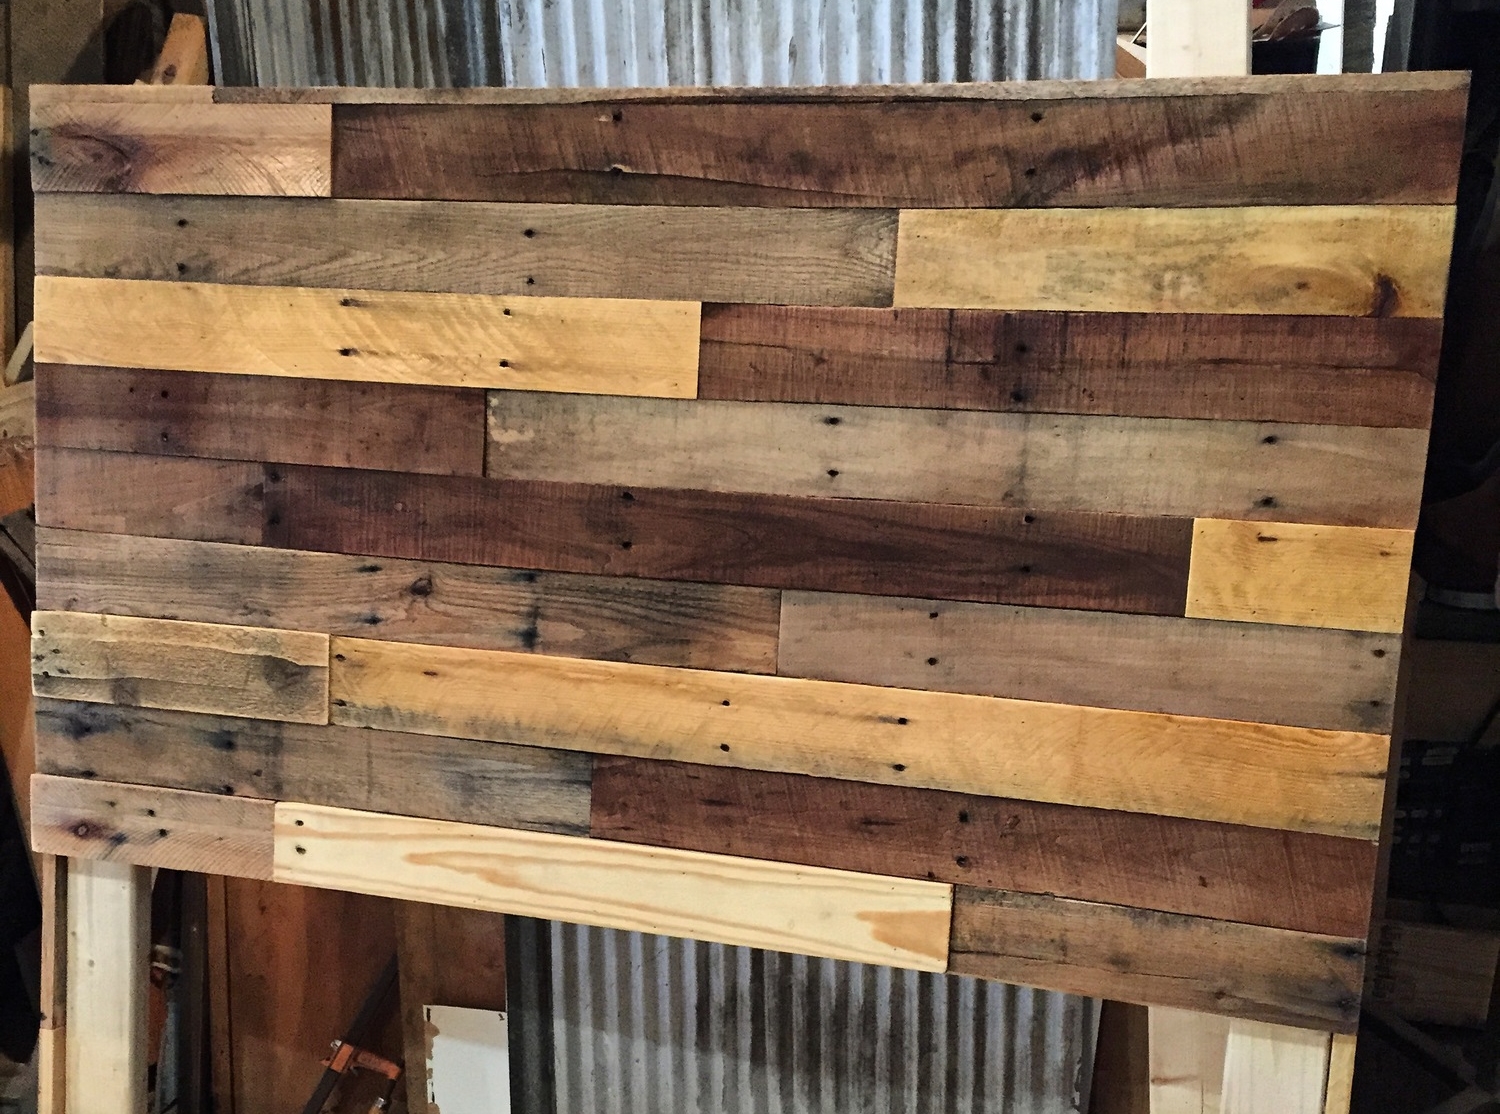 Pallet Wood Headboard Diy Revival, How To Make Bed Frame Out Of Wood Pallets